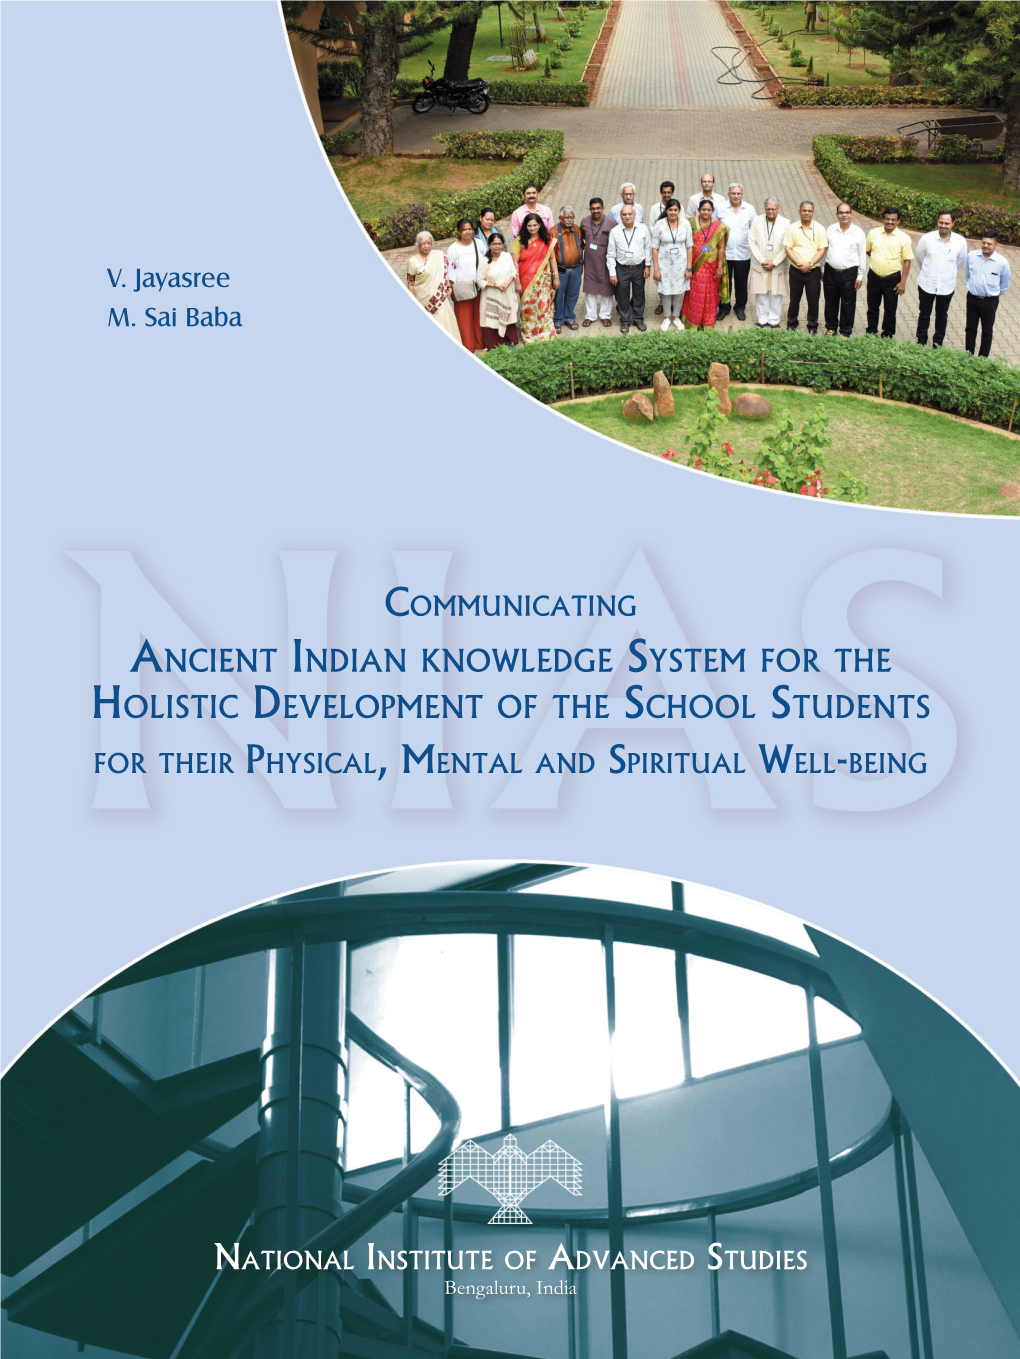 Ancient Indian Knowledge System for the Holistic Development of the School Students for Their Physical, Mental and Spiritual Well-Being